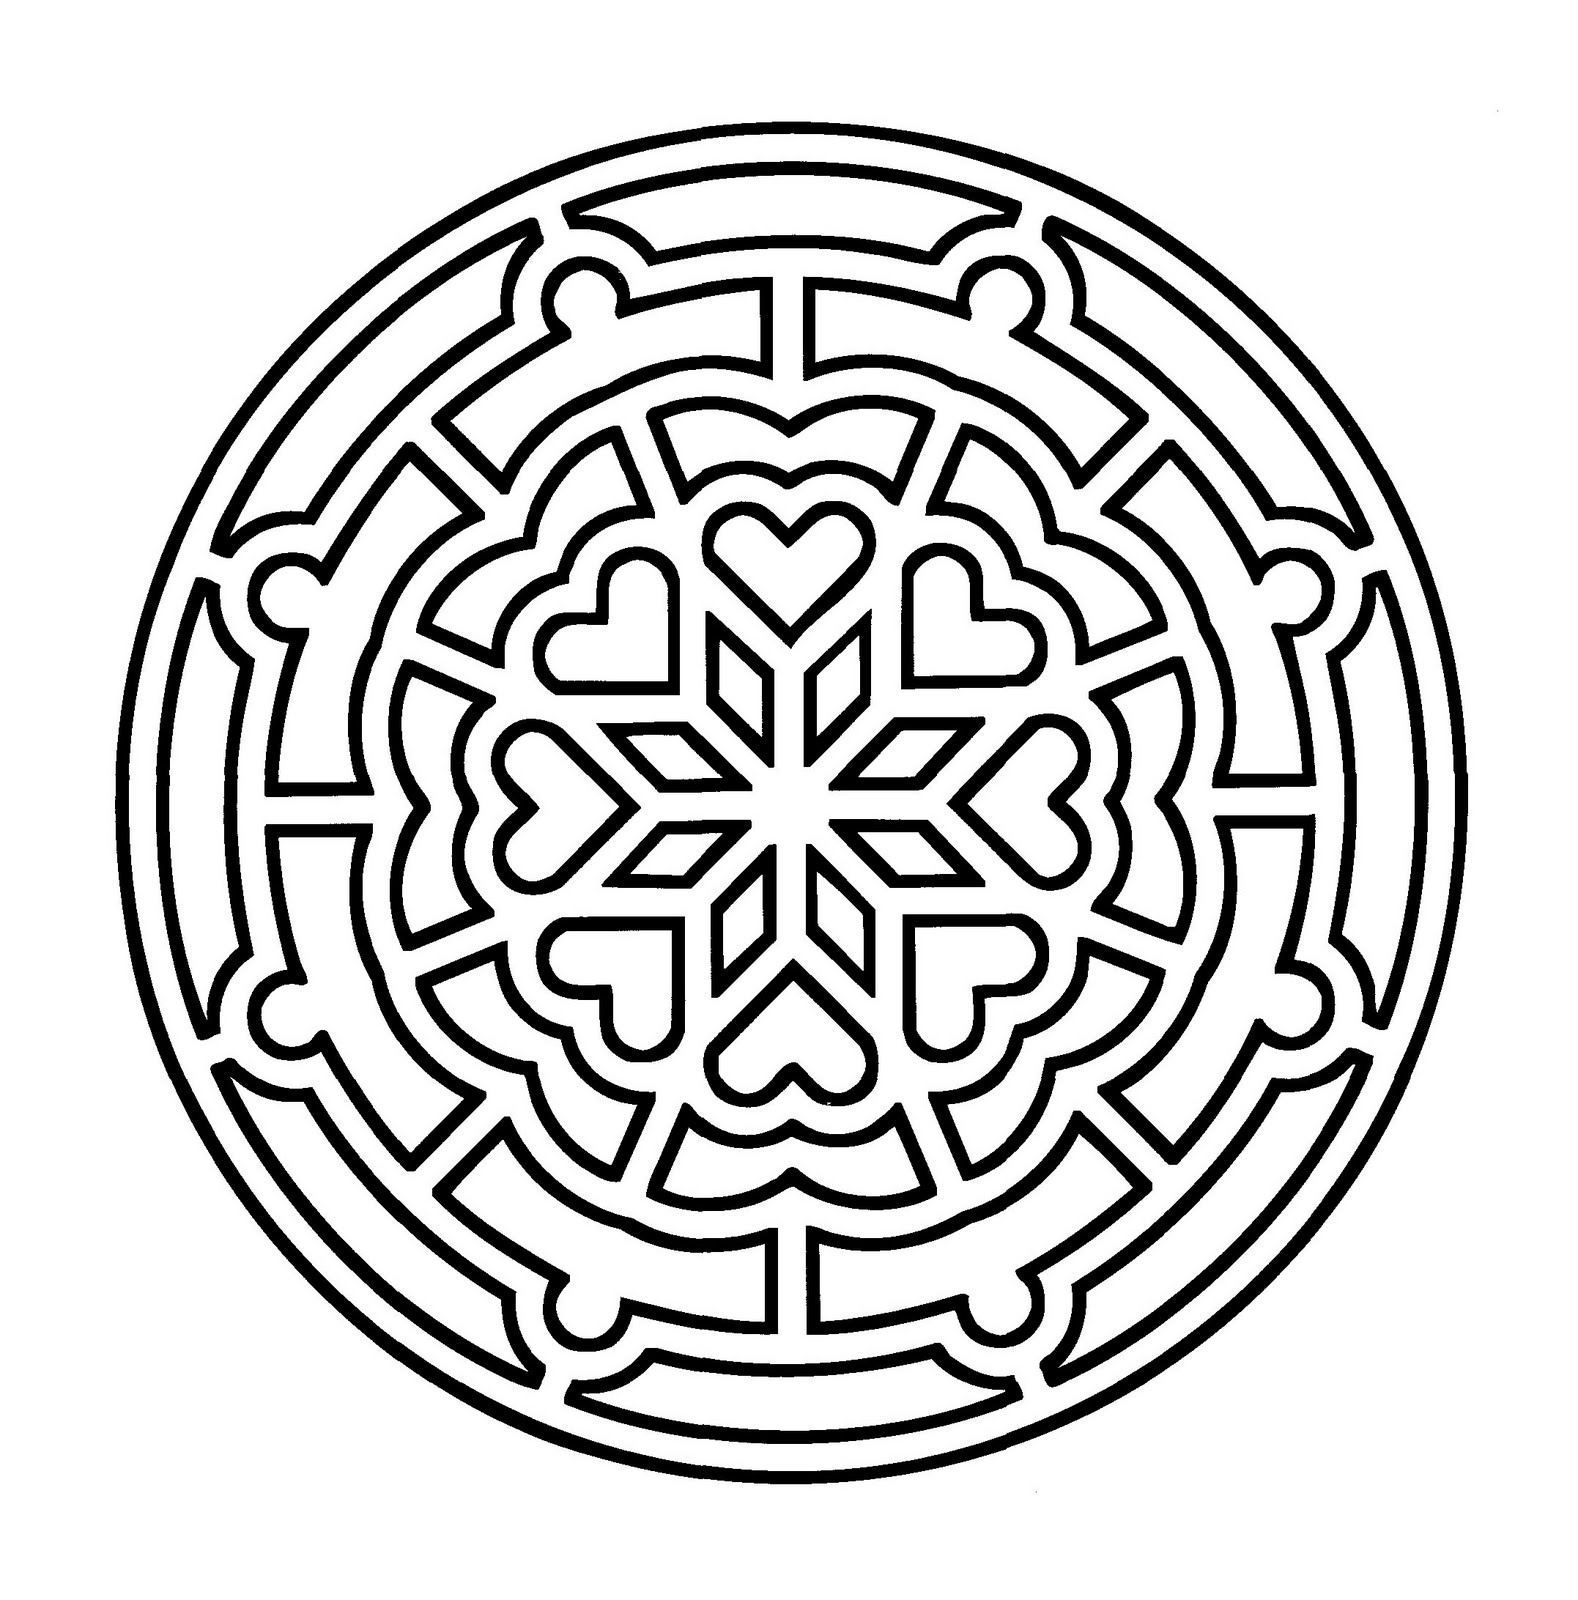 Simple mandala 4 - M&alas Coloring pages for kids to print ...